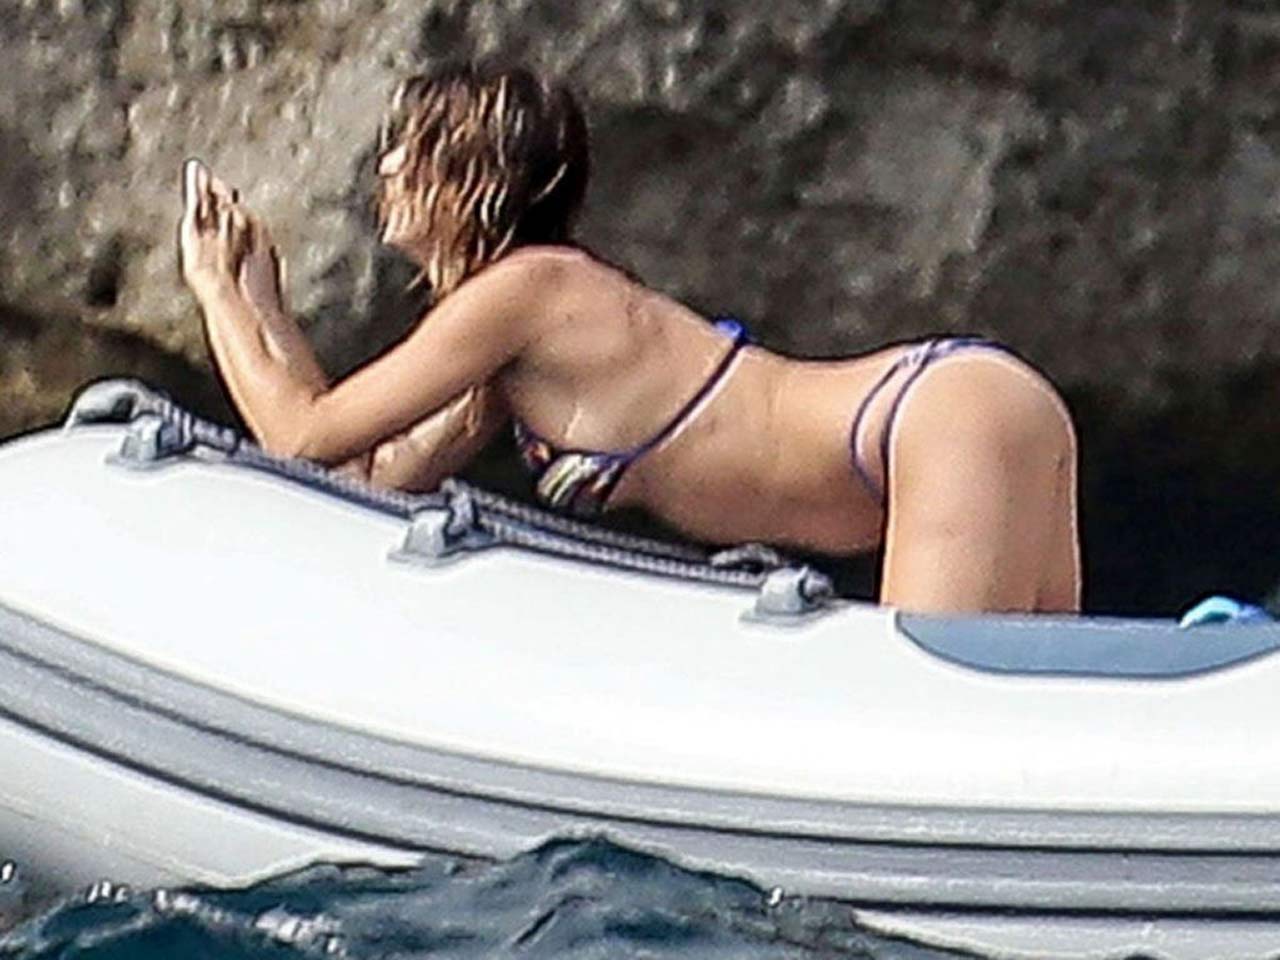 Elisabetta Canalis Nude Tits And Ass In Italy Scandal Planet